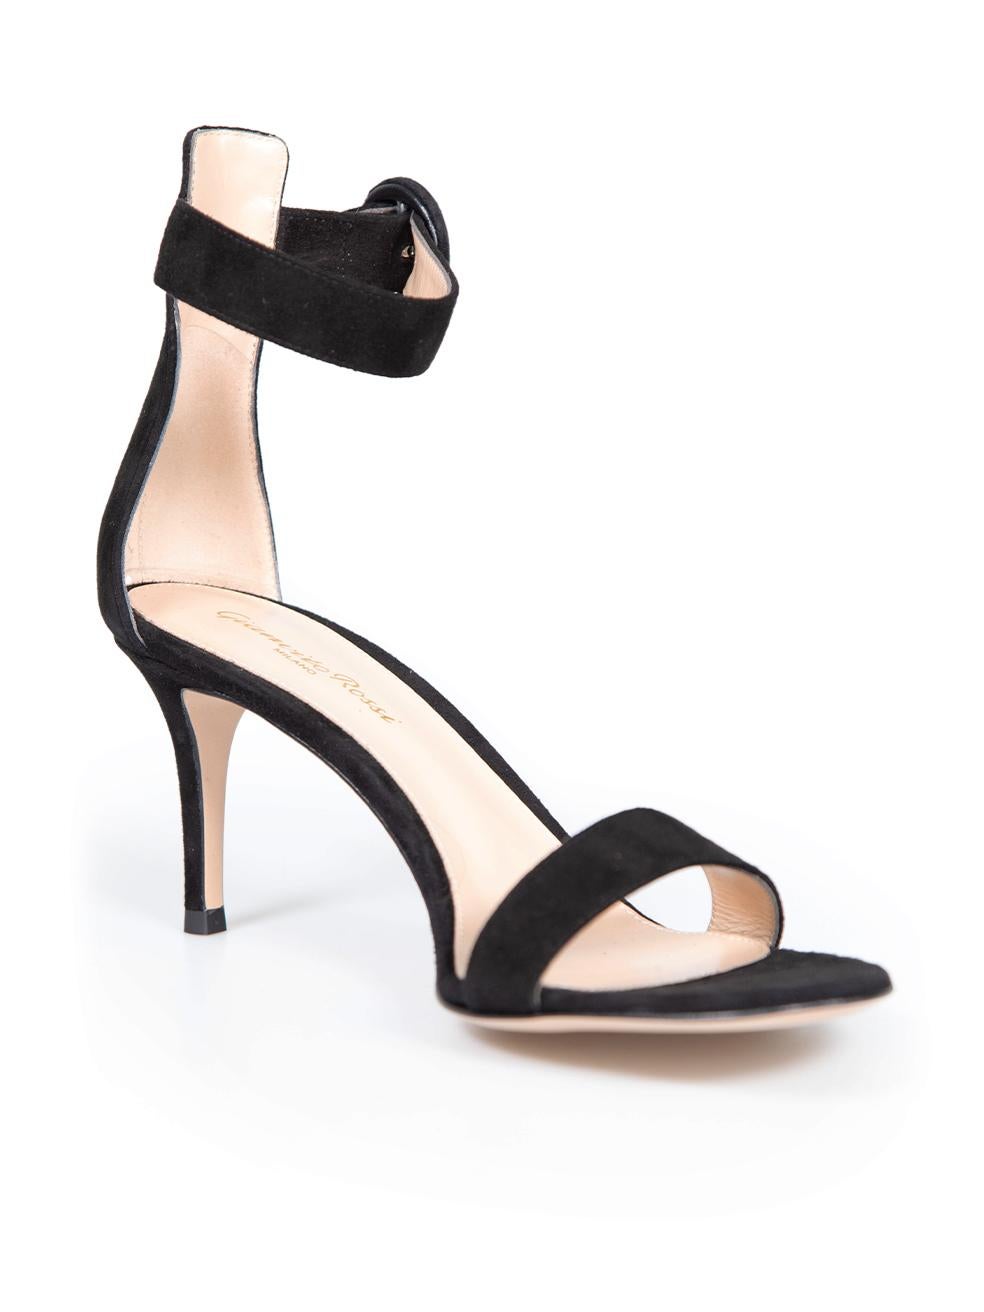 CONDITION is Never worn. No visible wear to sandals is evident on this new Gianvito Rossi designer resale item. This item comes with original dust bag and shoe box.
 
 
 
 Details
 
 
 Model:Portofino
 
 Black
 
 Suede
 
 Sandals
 
 Open toe
 
 Mid